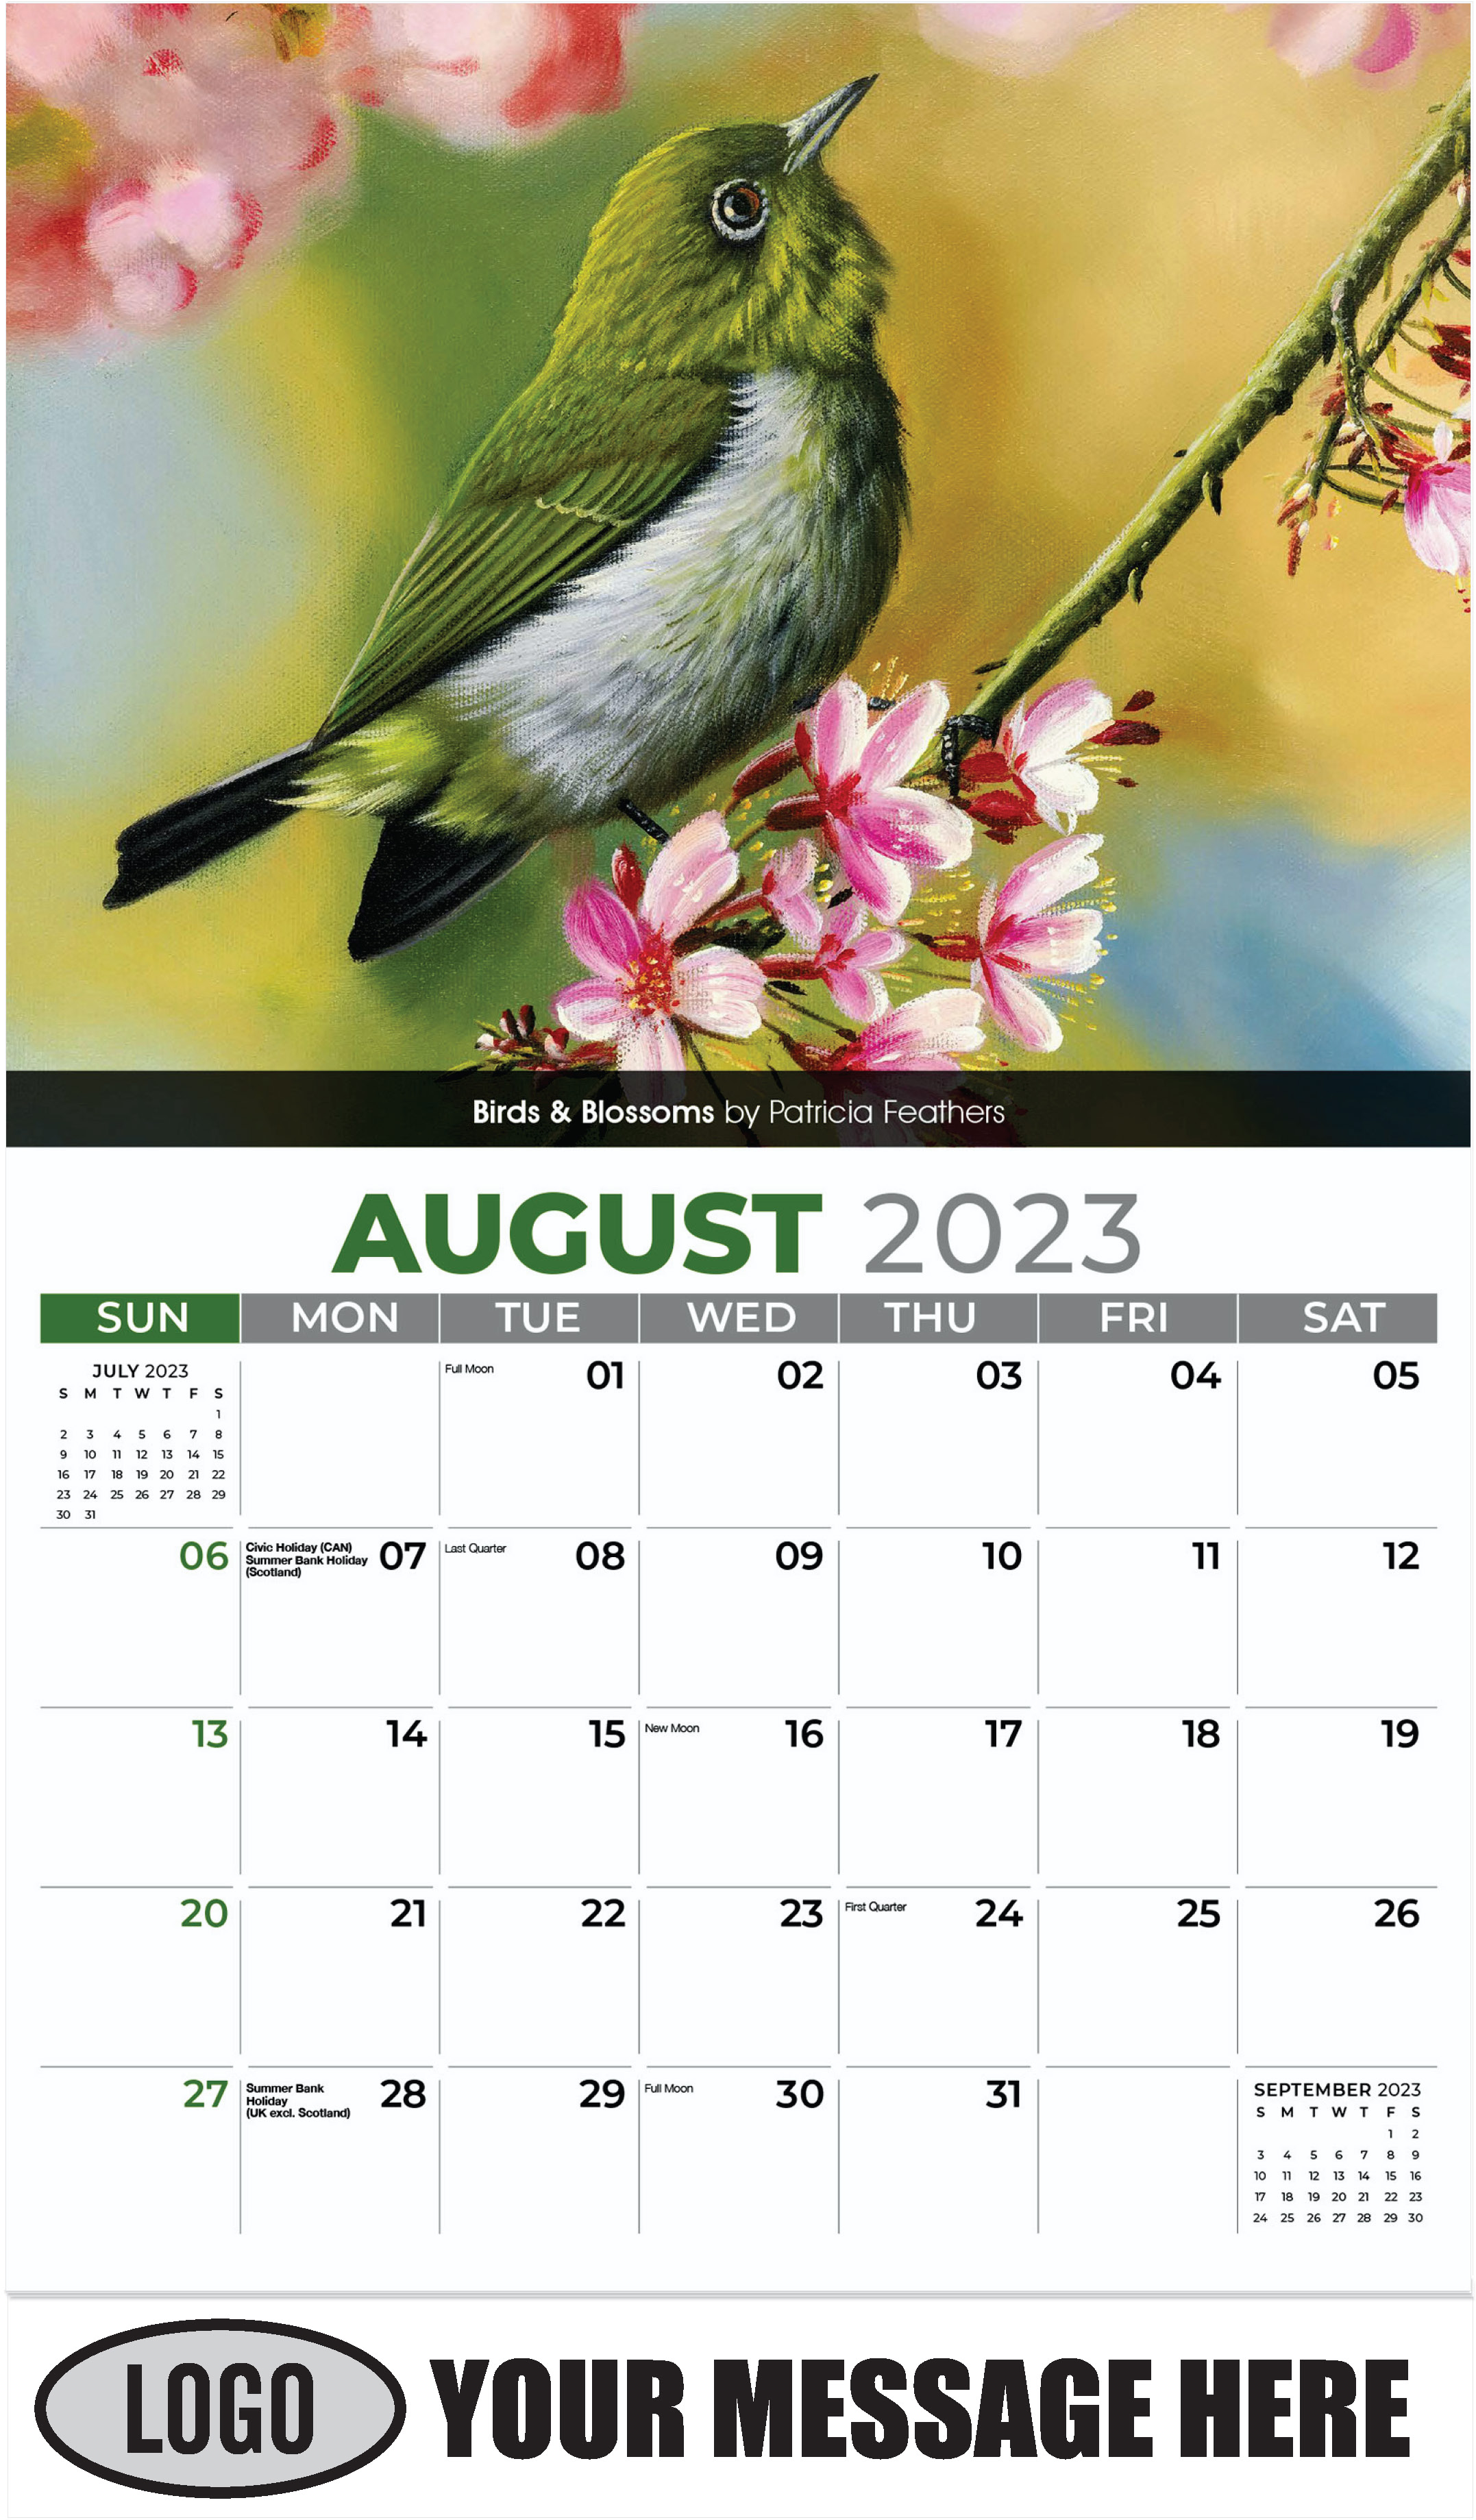 Birds & Blossoms by Patricia Feathers - August - Garden Birds 2023 Promotional Calendar